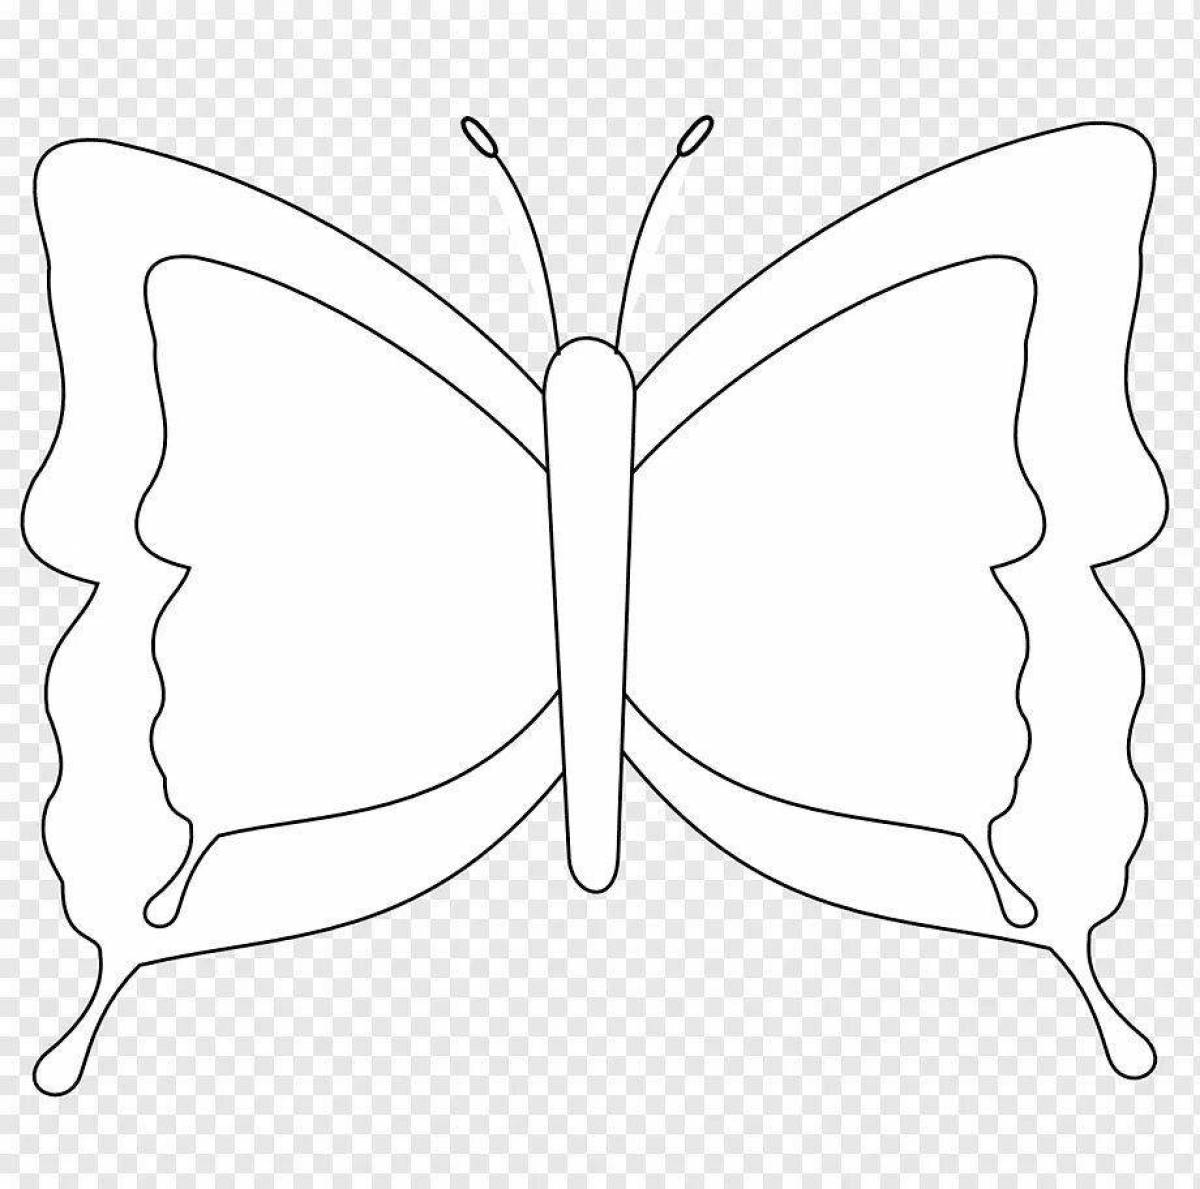 Adorable black and white butterfly coloring book